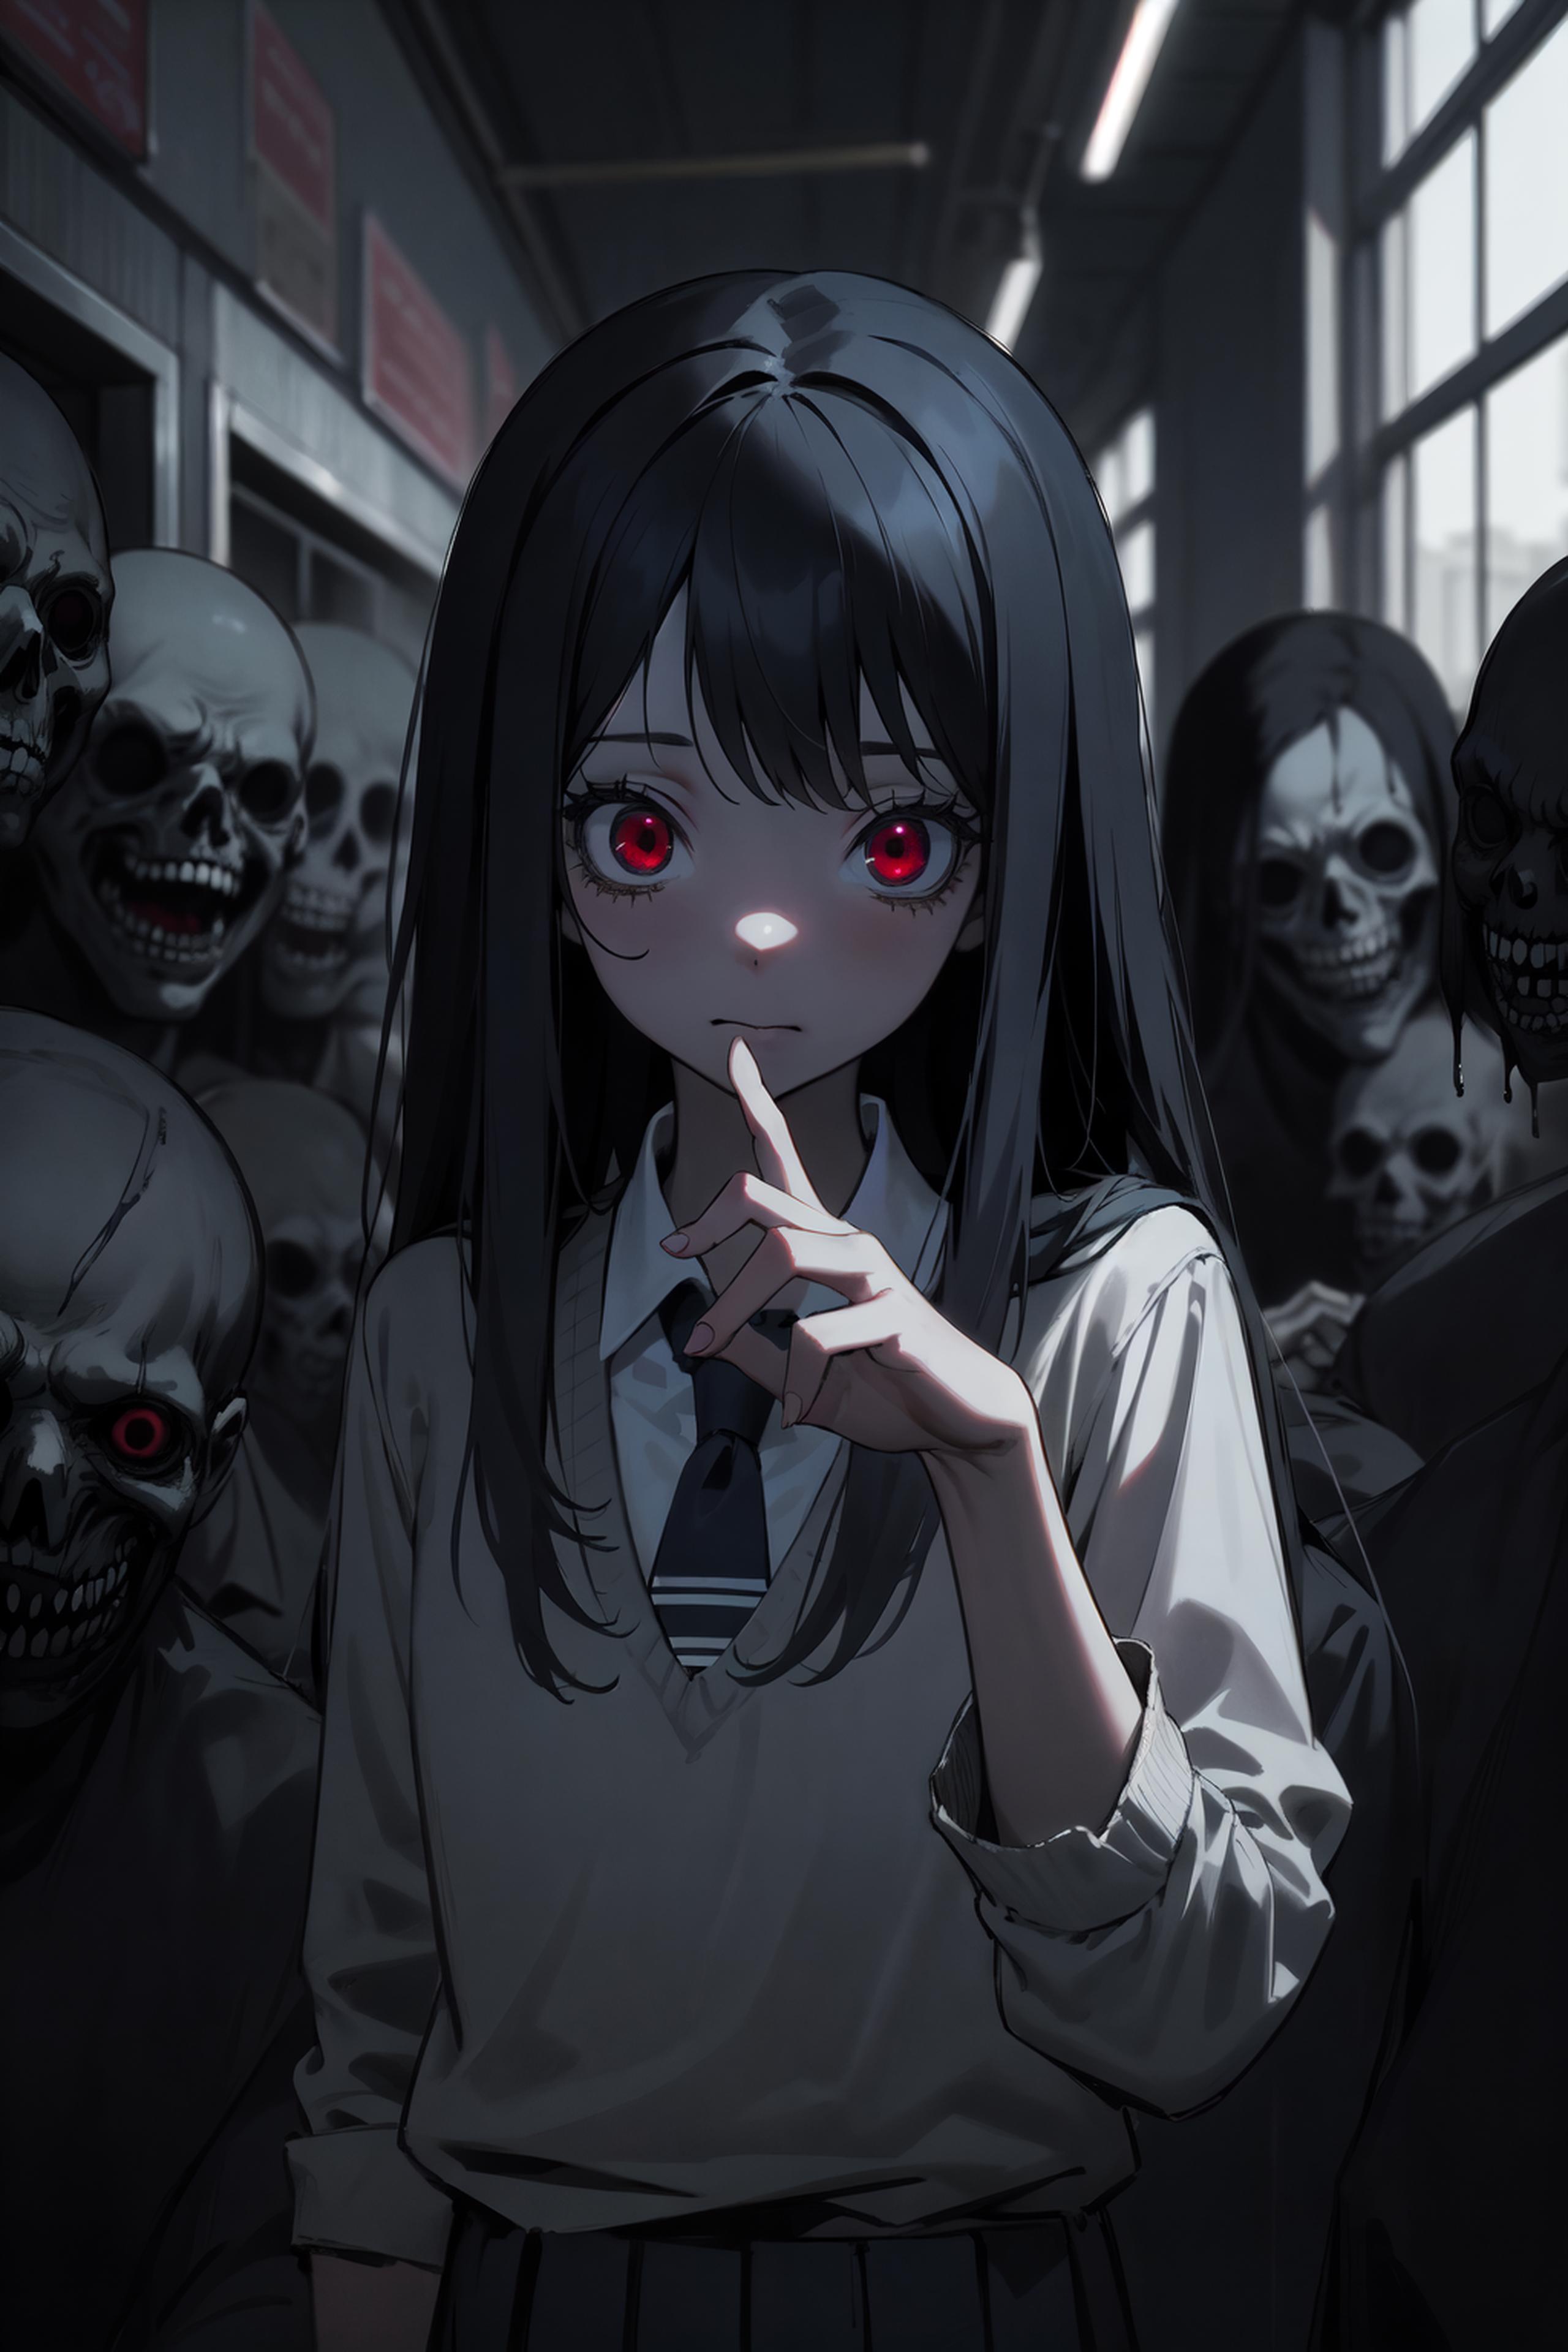 A young girl with a red dot in her eye, surrounded by skeletons.